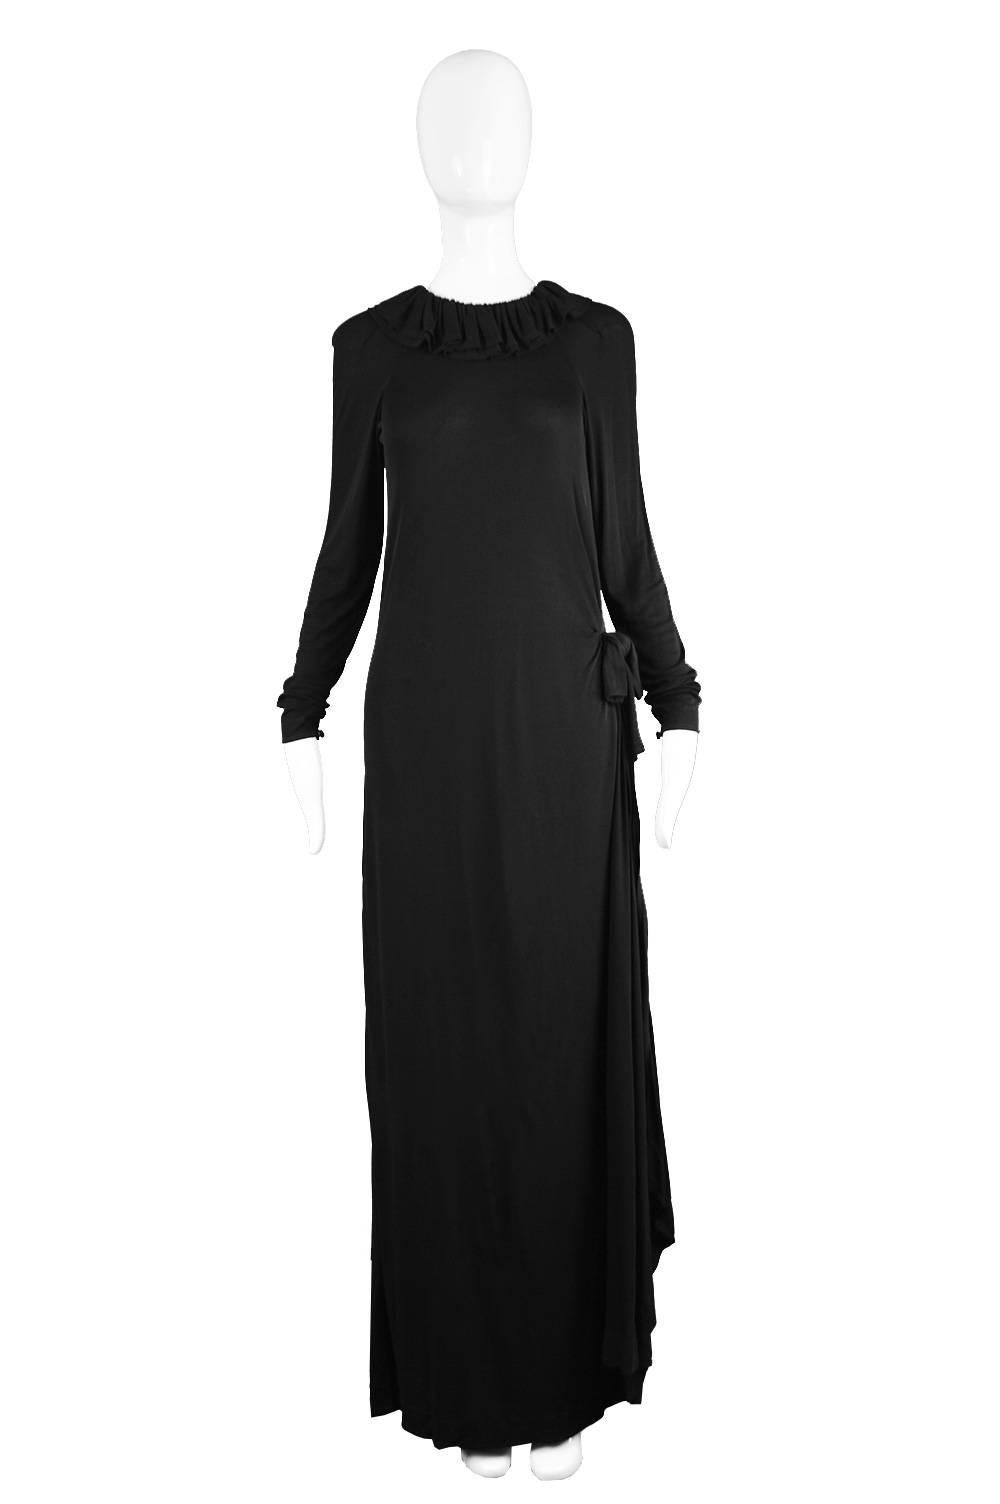 An incredible vintage Jean Muir column maxi dress from c. the late 1970s in a slinky black rayon jersey with a playful ruffle collar, a long elegant cut with clean lines creating the sophistication that Miss Muir was known for and a glamorous side